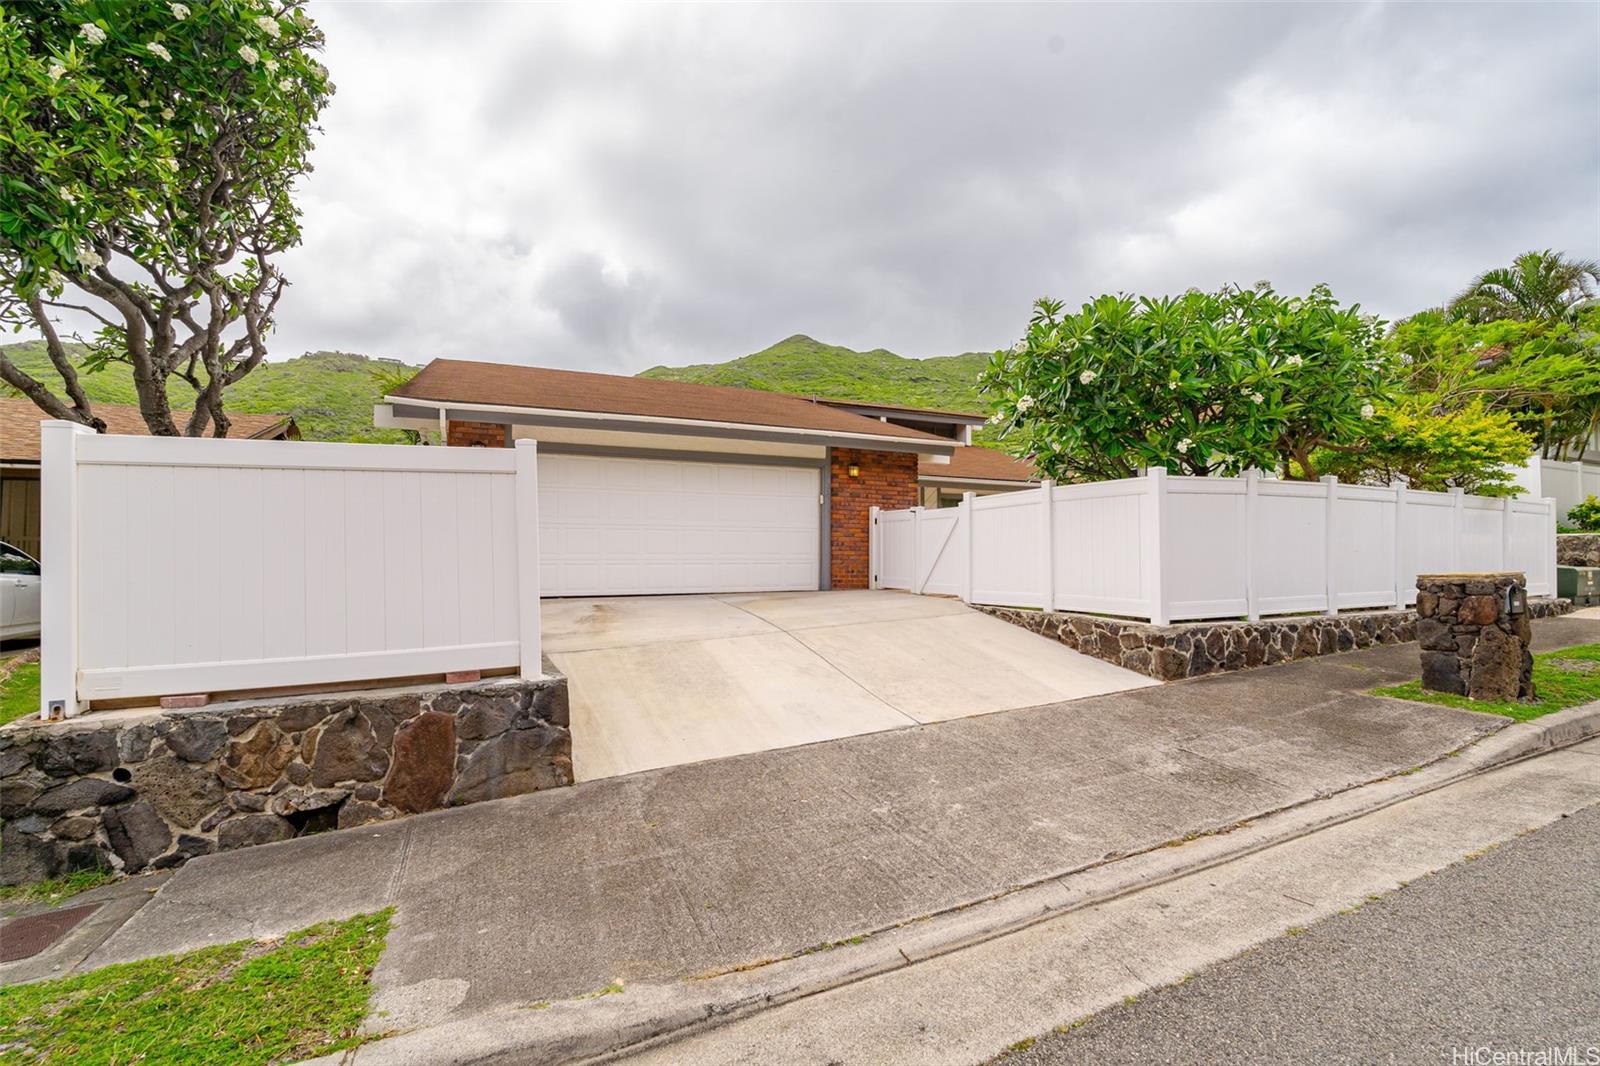 driveway to house for sale in hawaii kai oahu